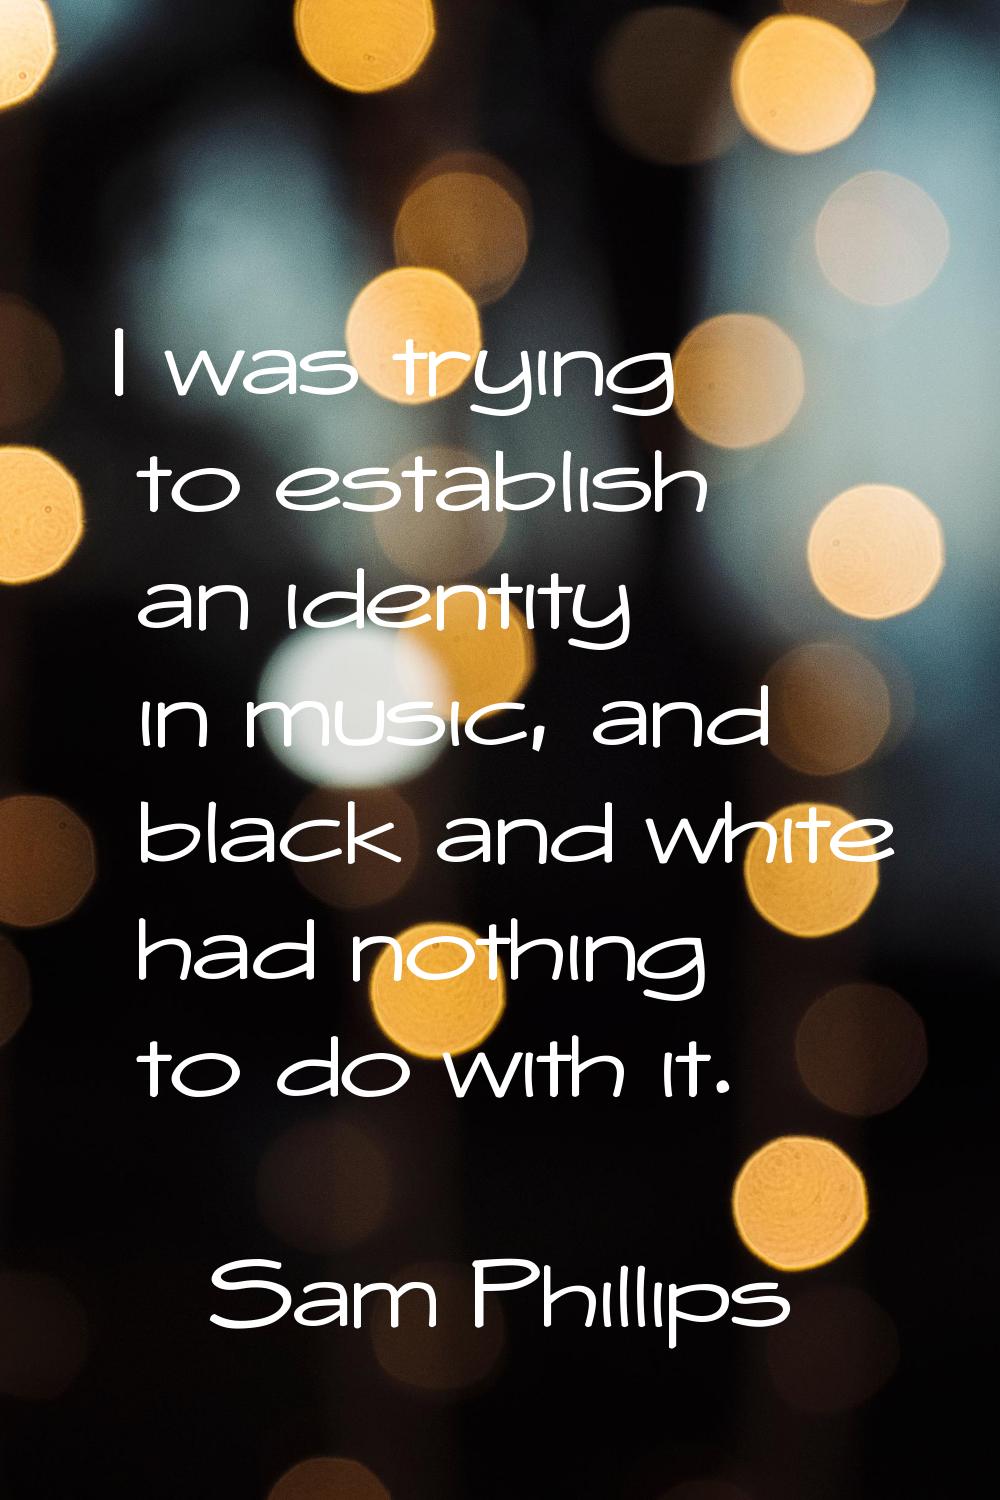 I was trying to establish an identity in music, and black and white had nothing to do with it.